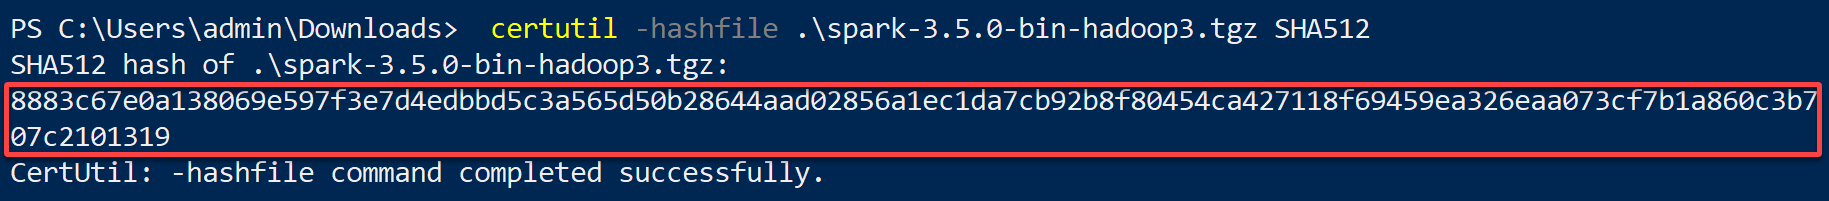 Generating a SHA512 hash of the Apache Spark package